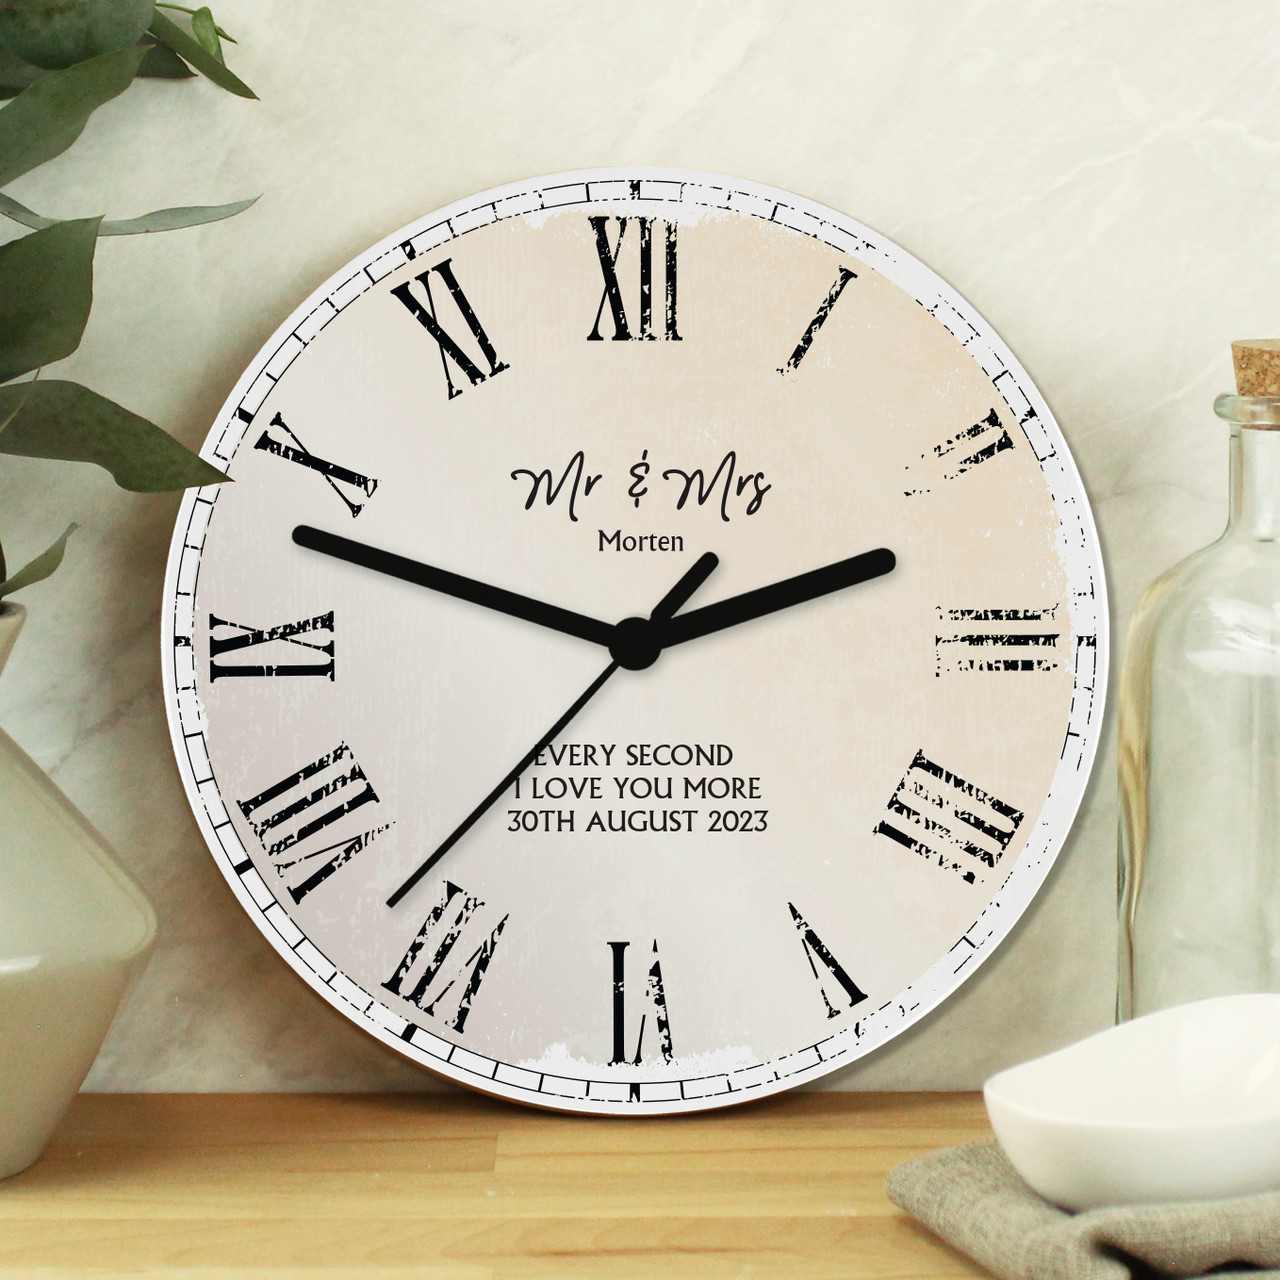 Buy marriage gifts for wedding wall clock in India @ Limeroad